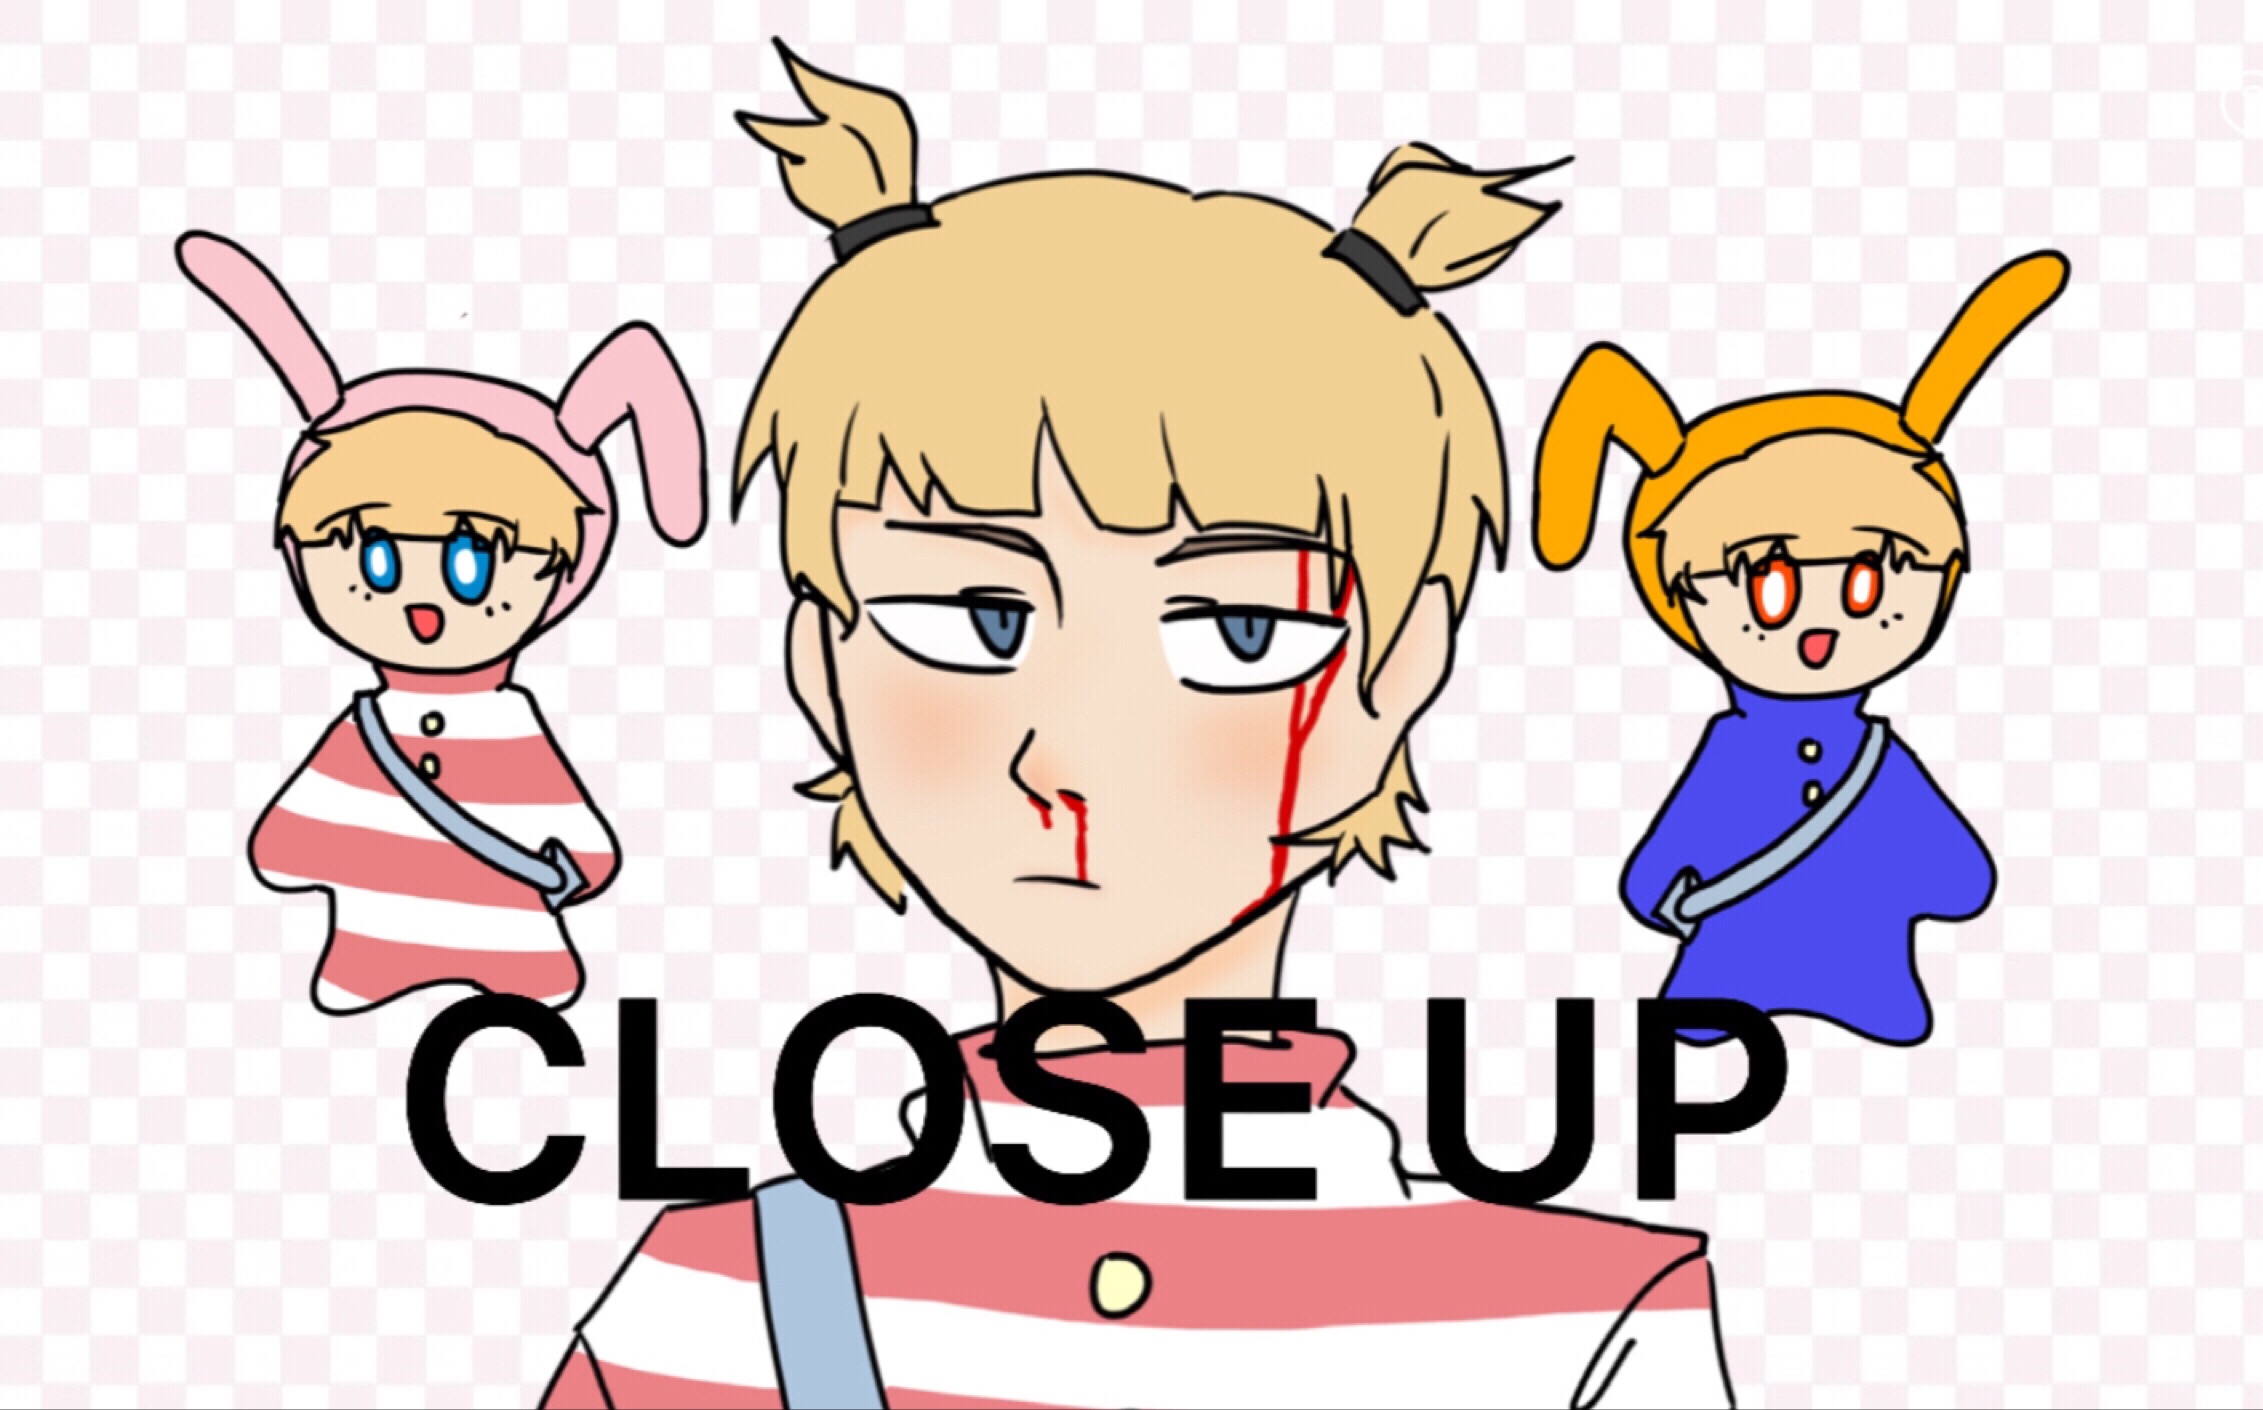 【poppe the perfromer/meme】close up